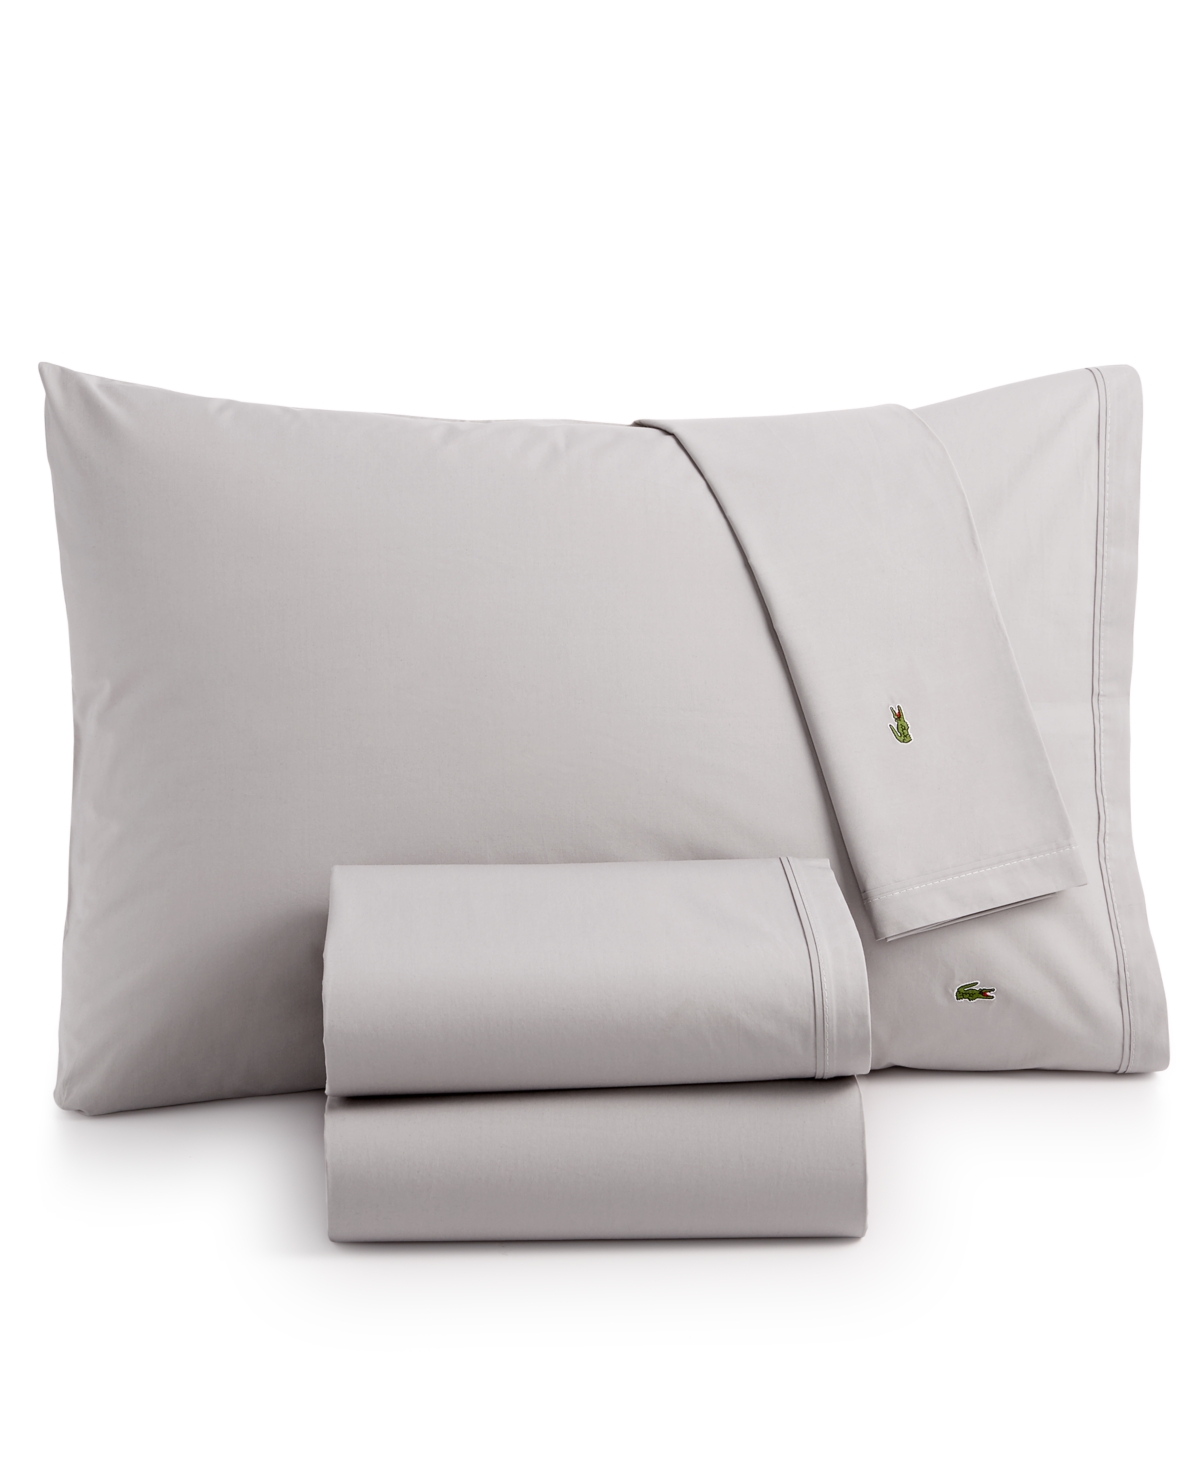 Lacoste Home Solid Cotton Percale Sheet Set, California King In Sleet